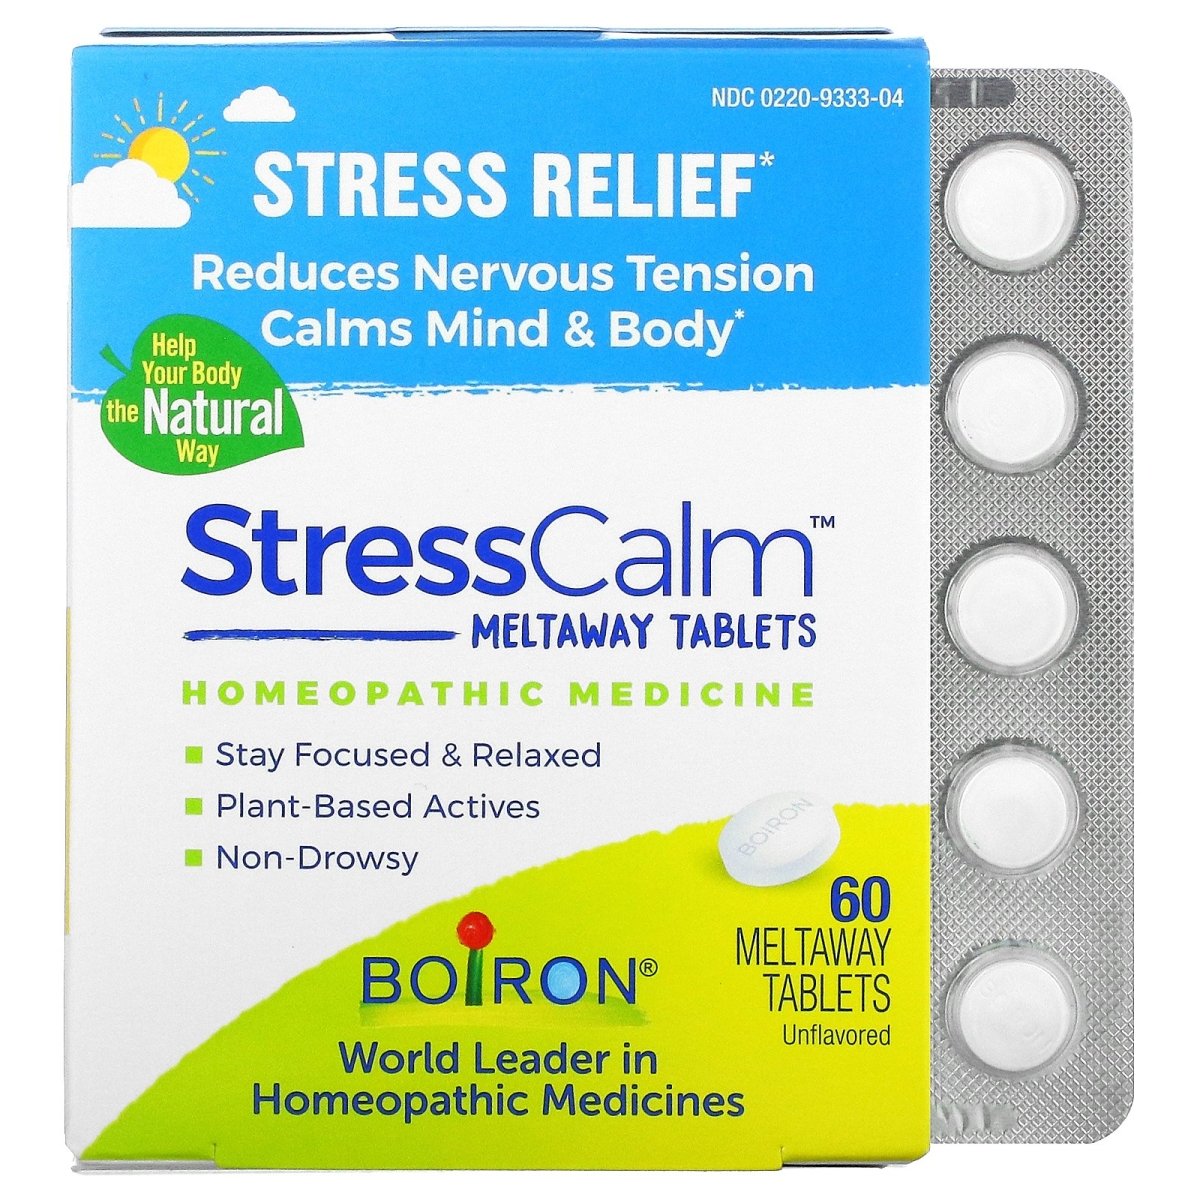 StressCalm - Stress Relief - 60 Meltaway Tablets Unflavored